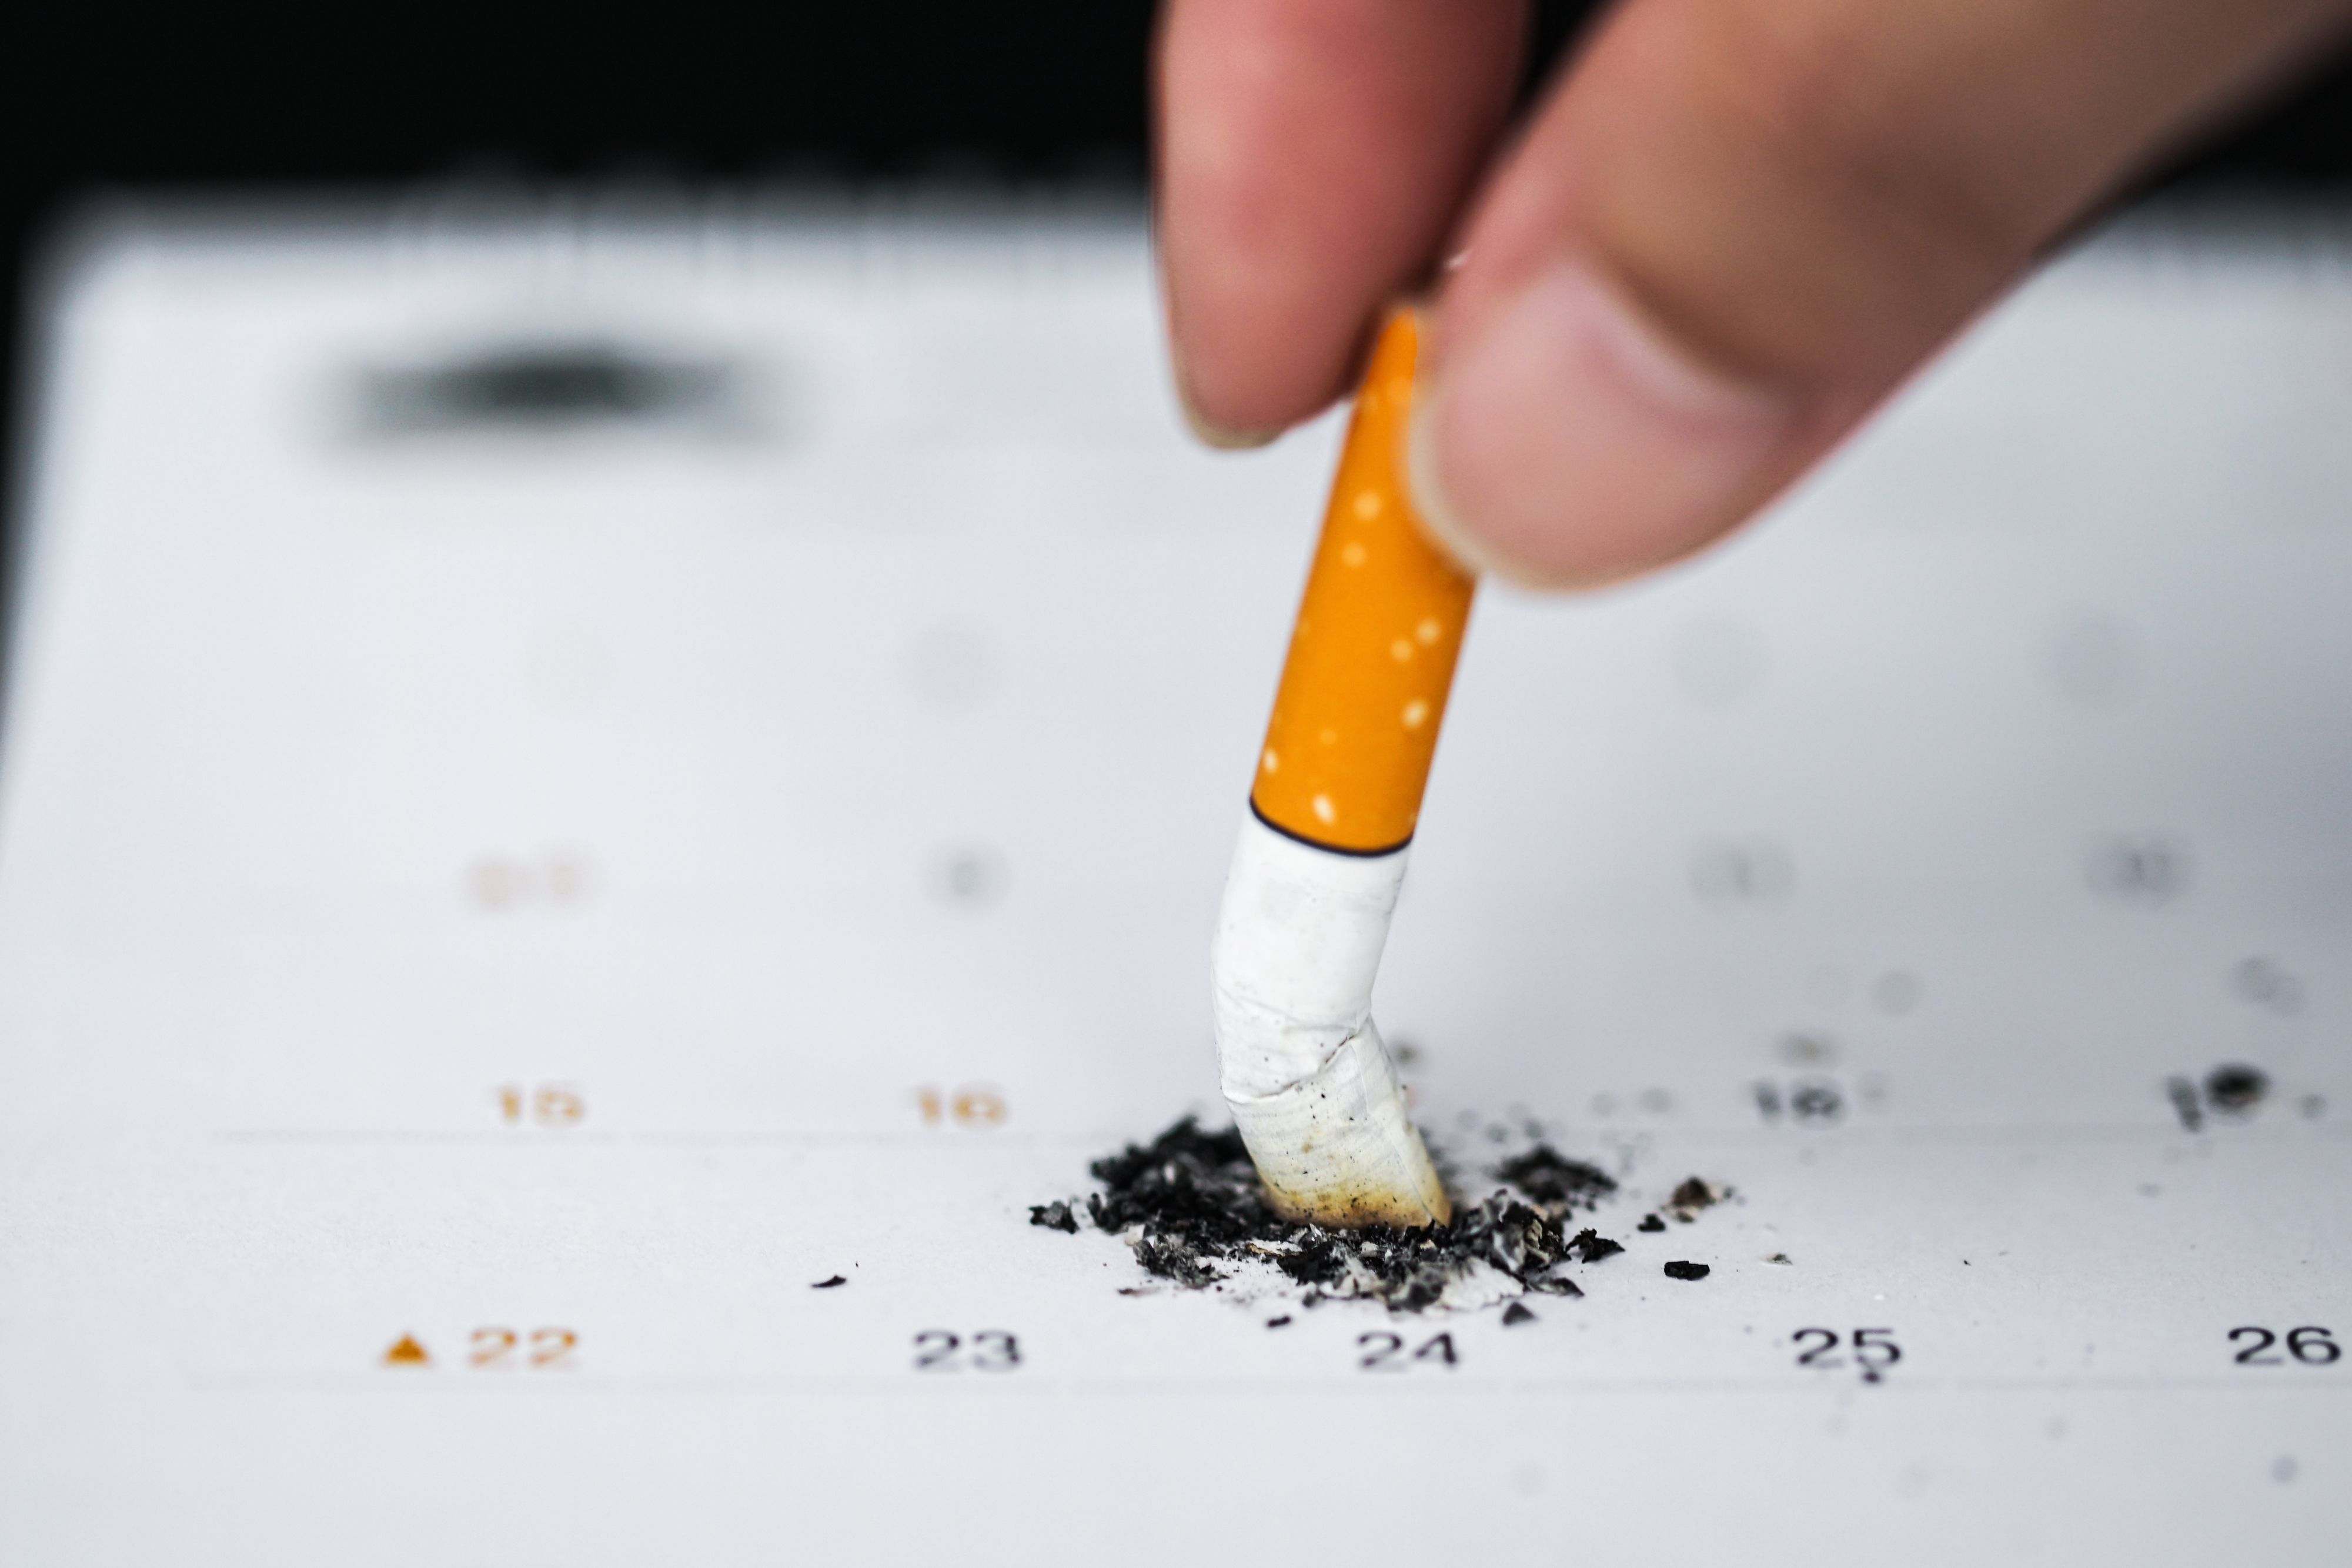 person putting out a cigarette on a calendar